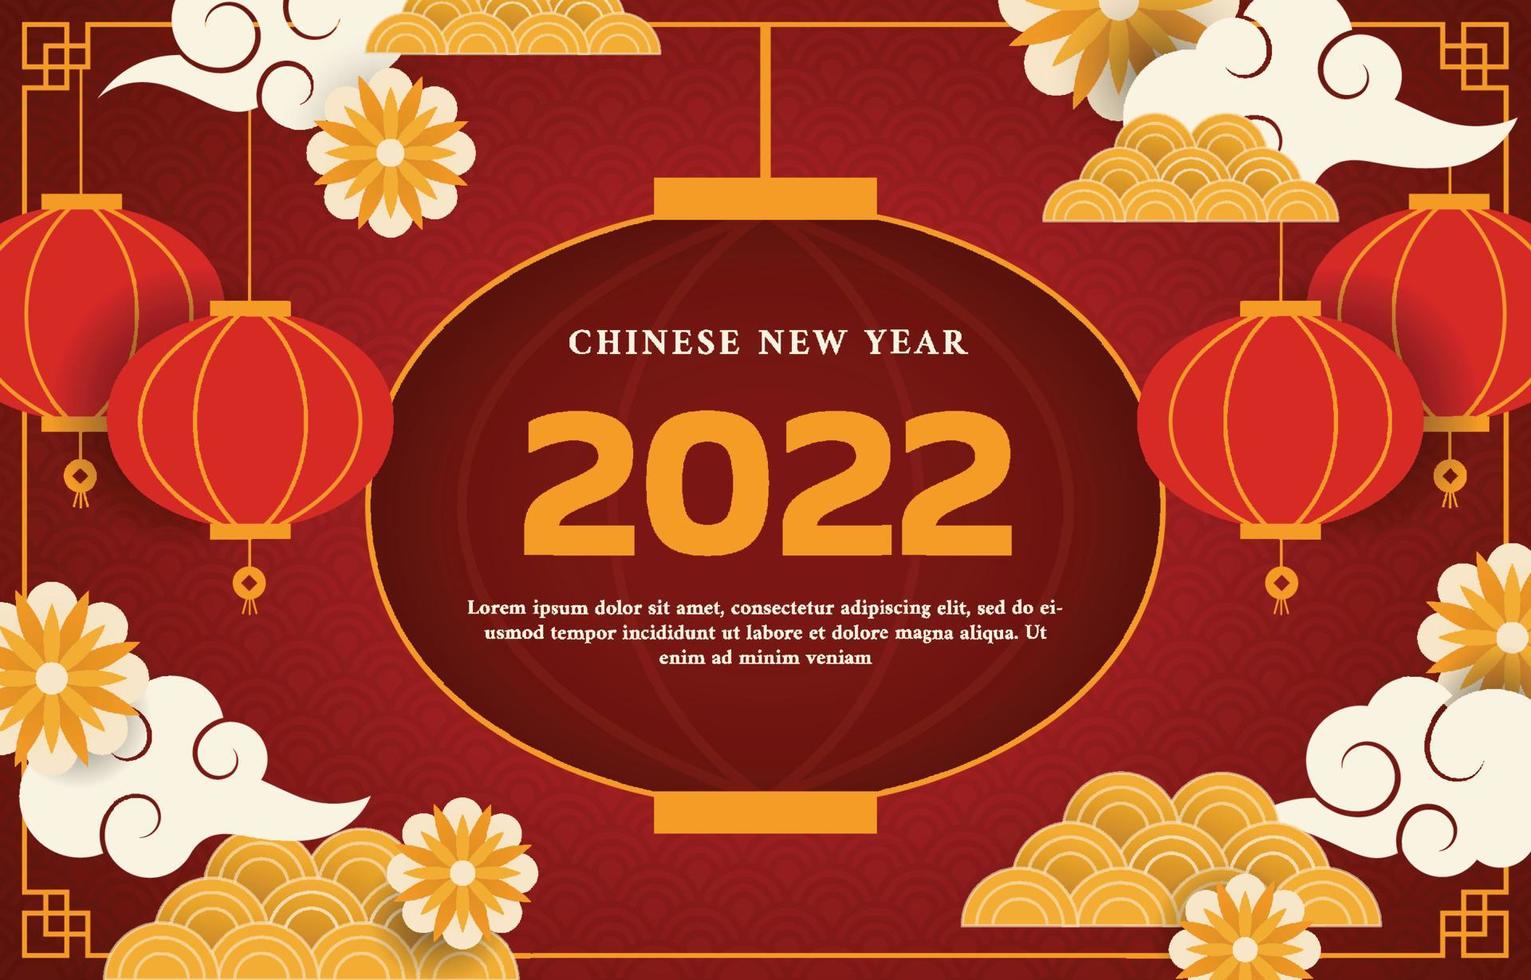 Chinese New Year 2022 Background Paper Style vector